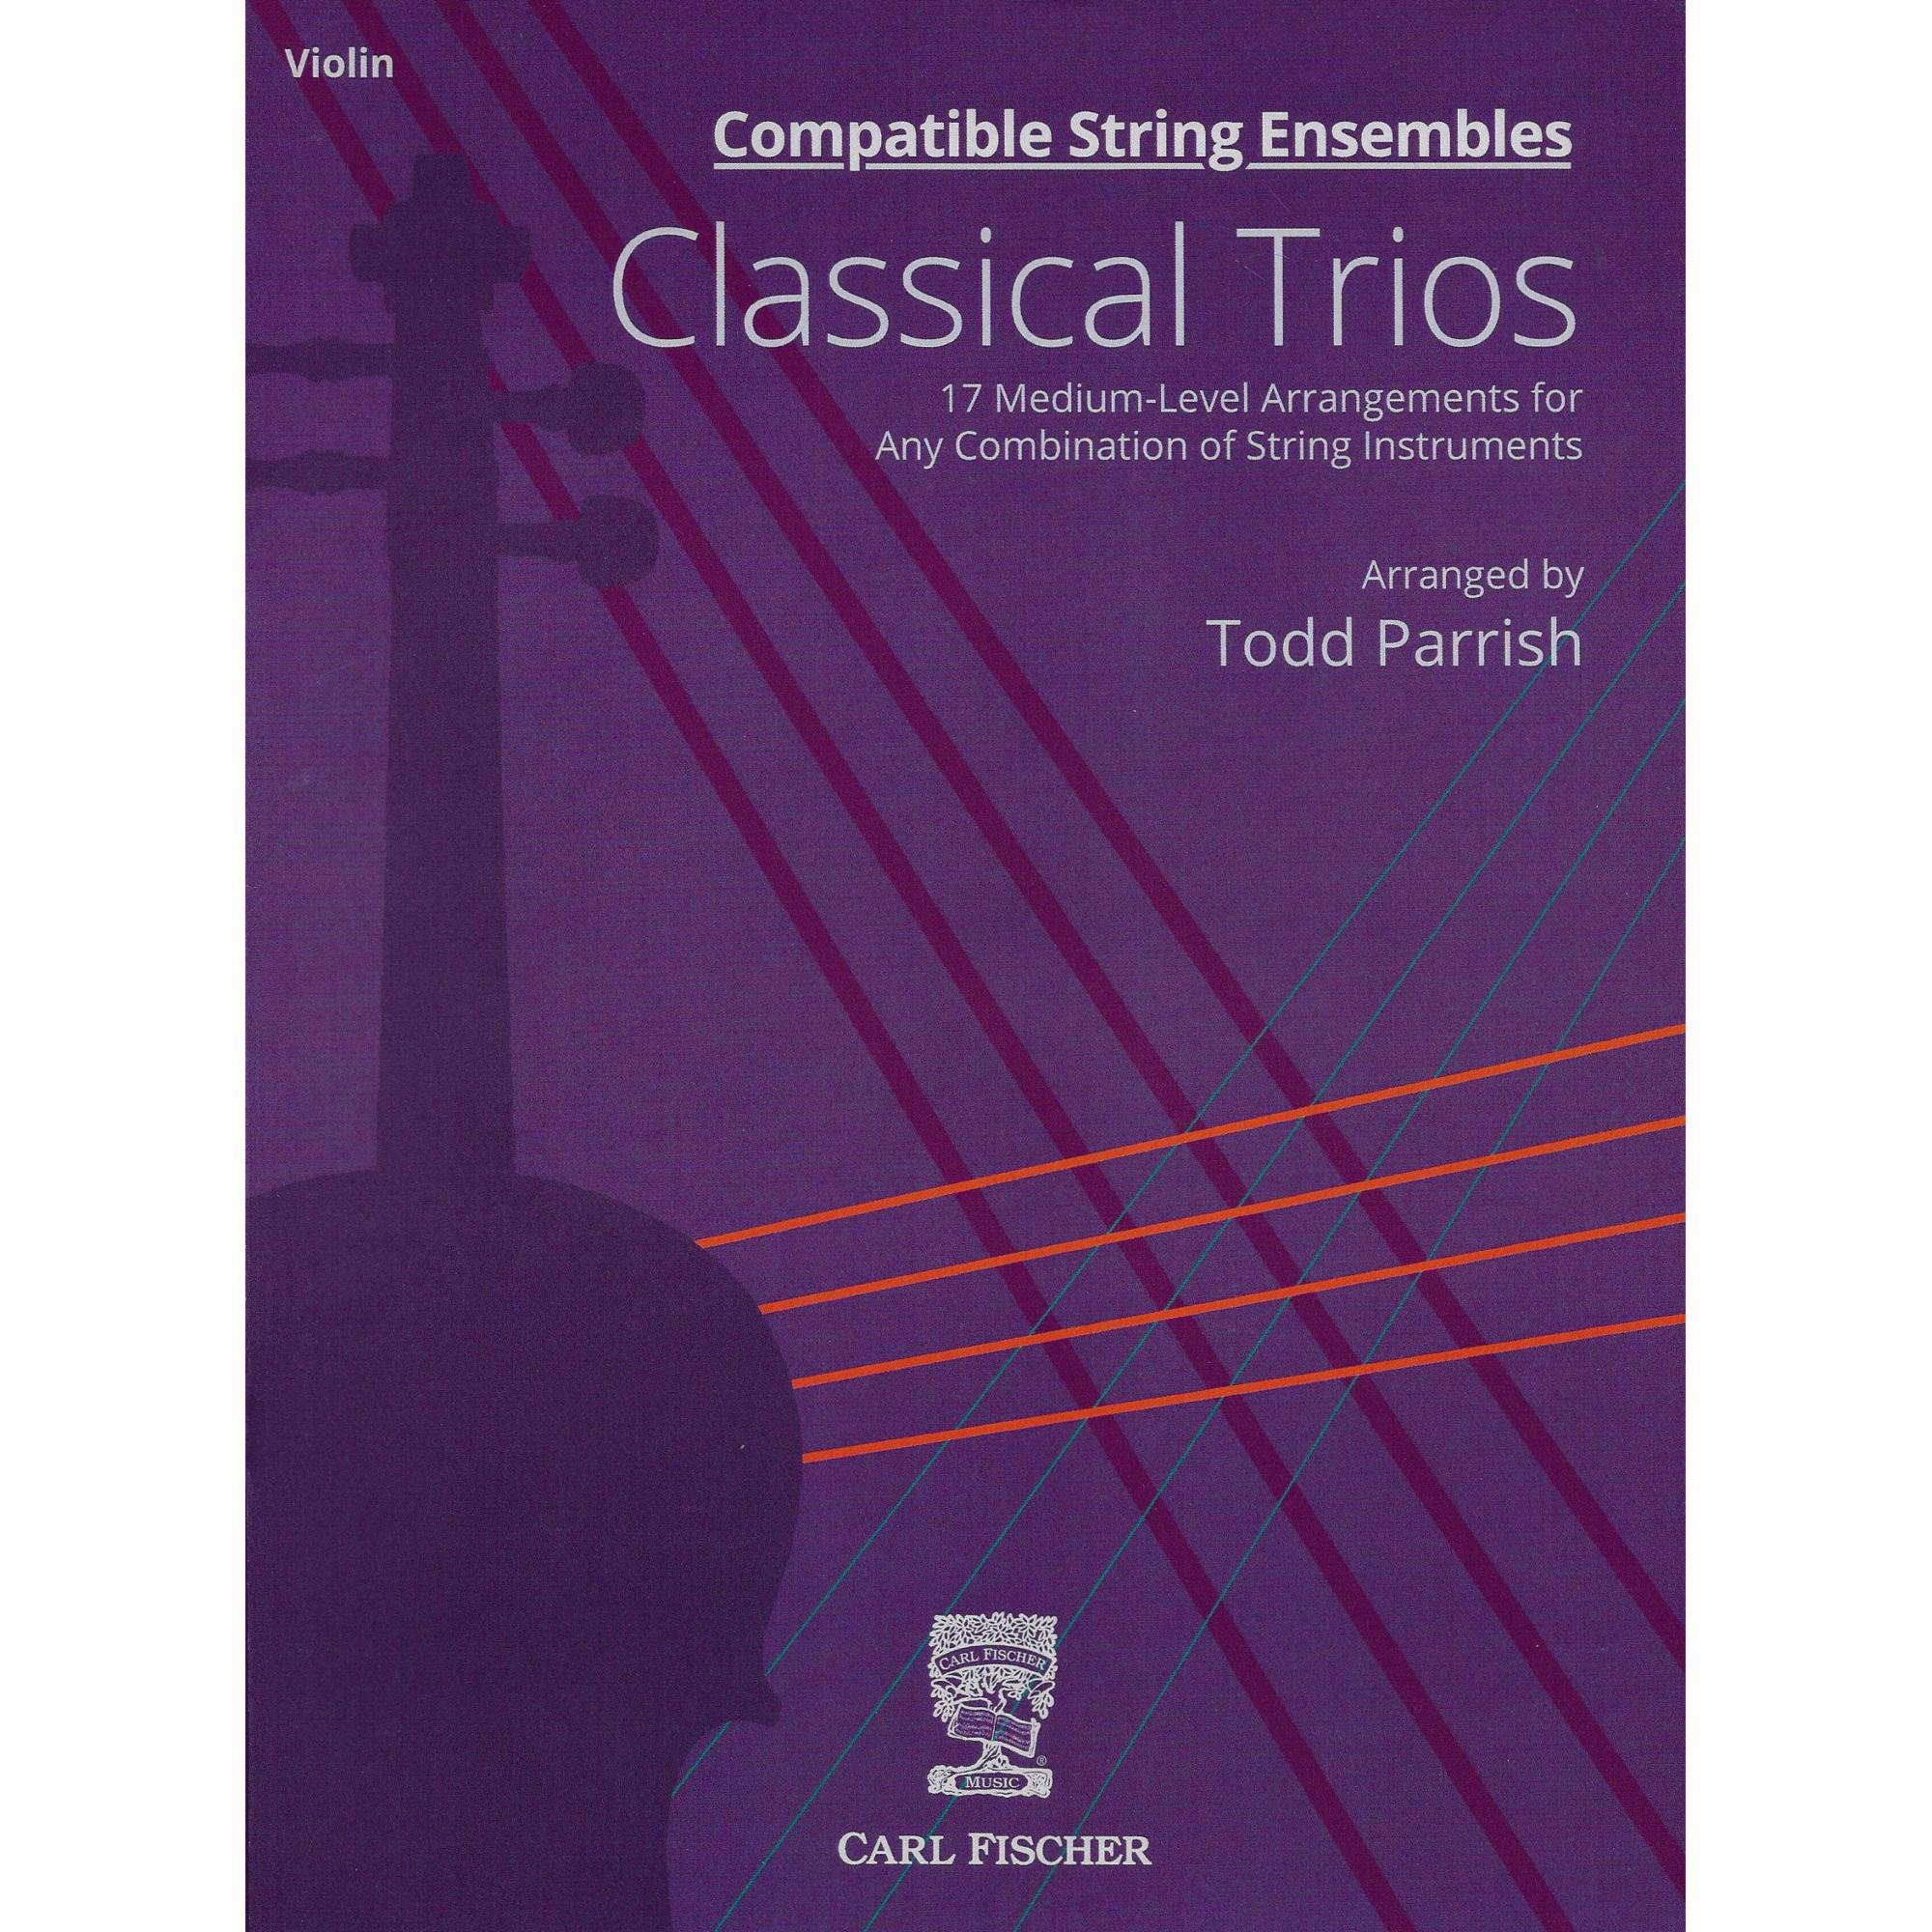 Classical Trios for Strings